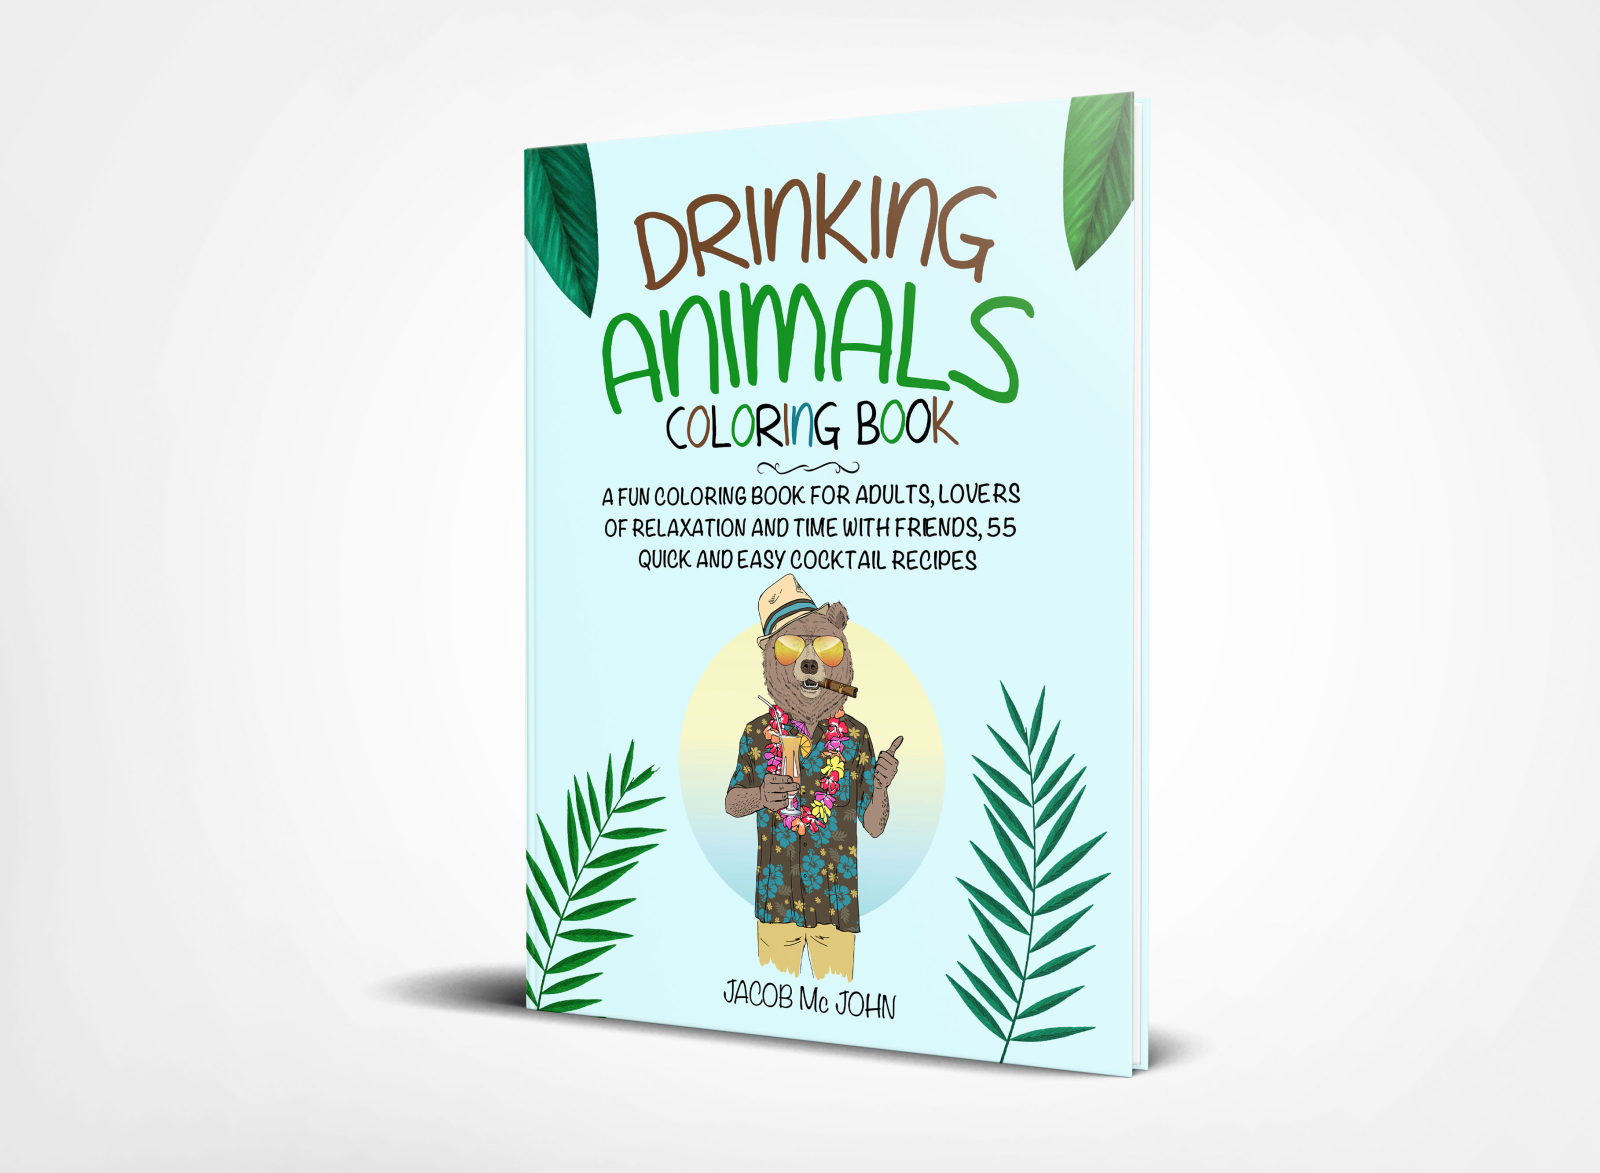 Drinking Animals Coloring Book by graphicexpert21 on Dribbble